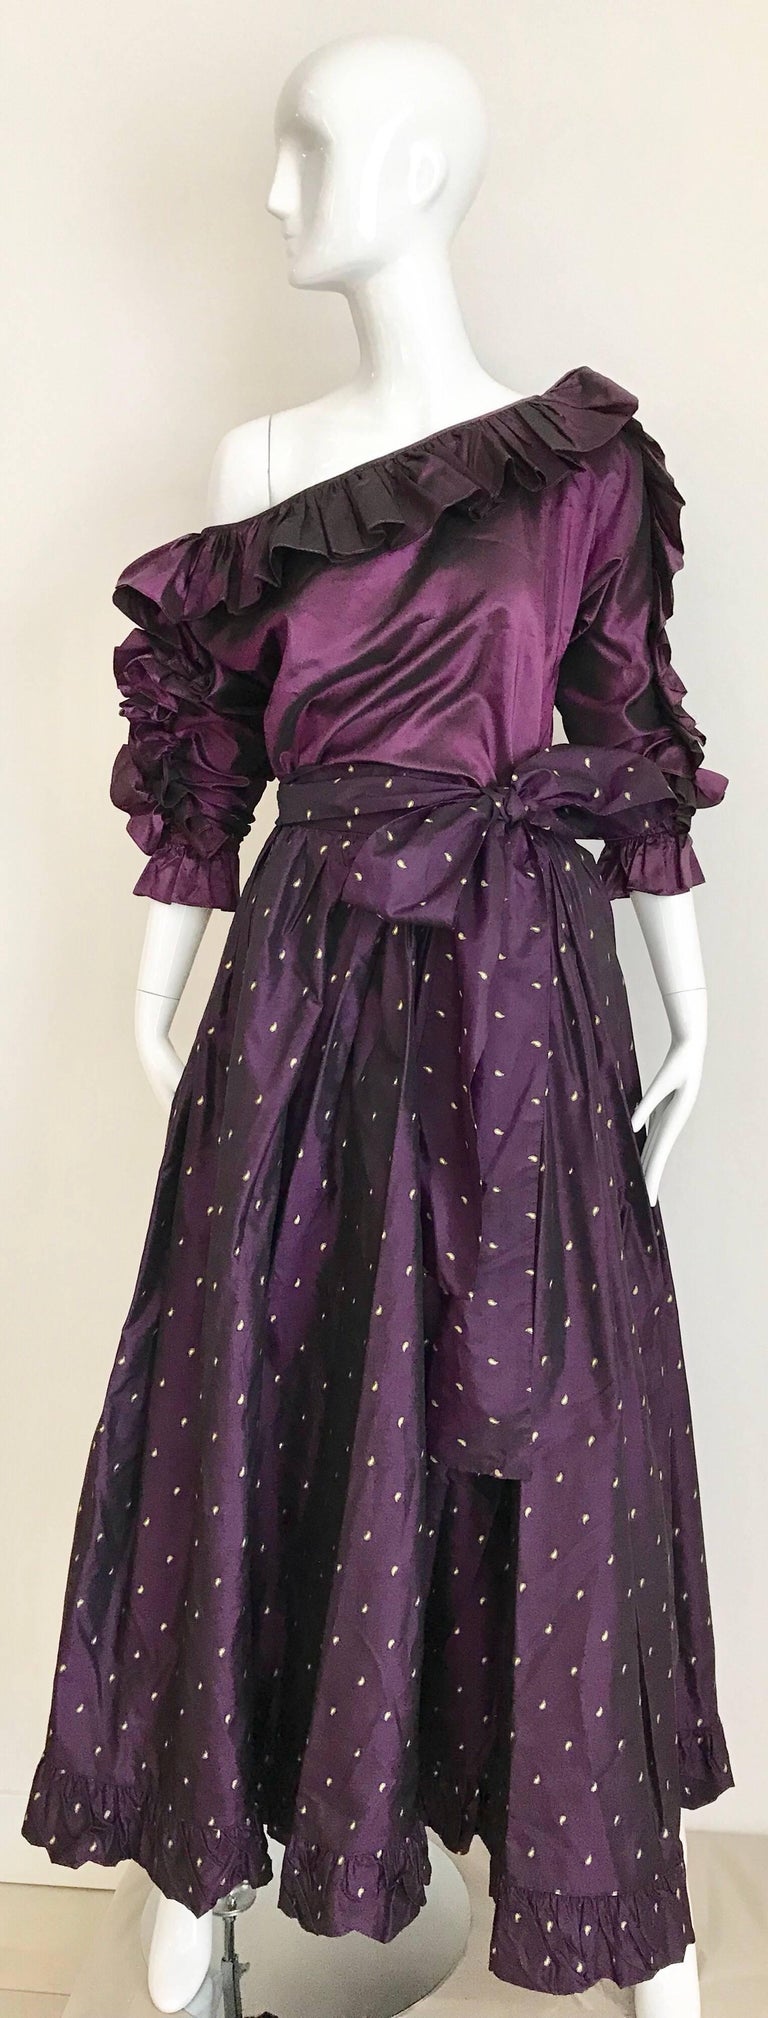 Classic 1990s Yves Saint Laurent aubergine ruffle silk blouse and maxi skirt set.
Skirt has silk sash belt attached ( it can be removed). Perfect for cocktail party ensemble.
blouse and skirt marked size 42 France. This sets fit US size Small -